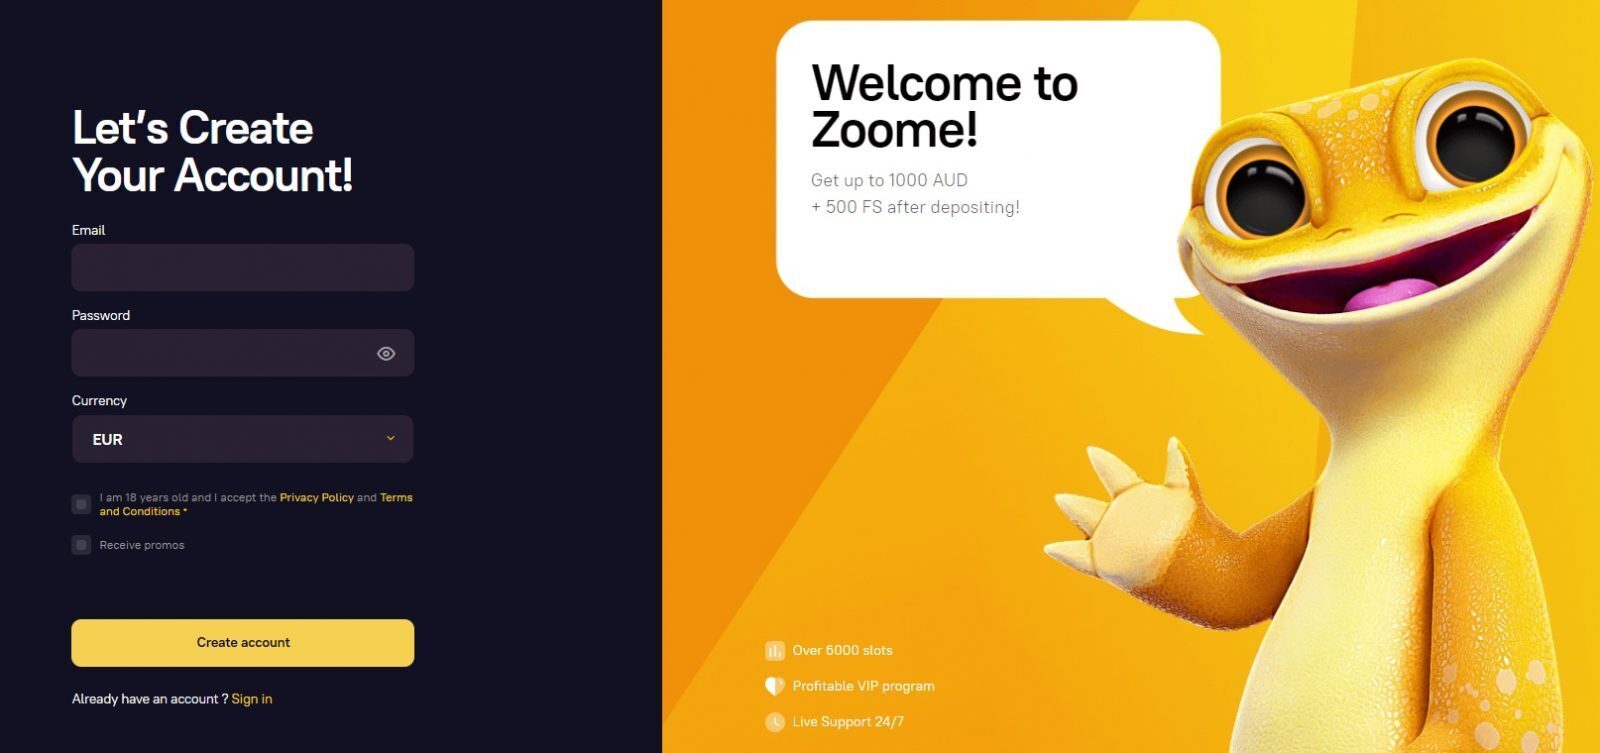 Zoome casino sign up